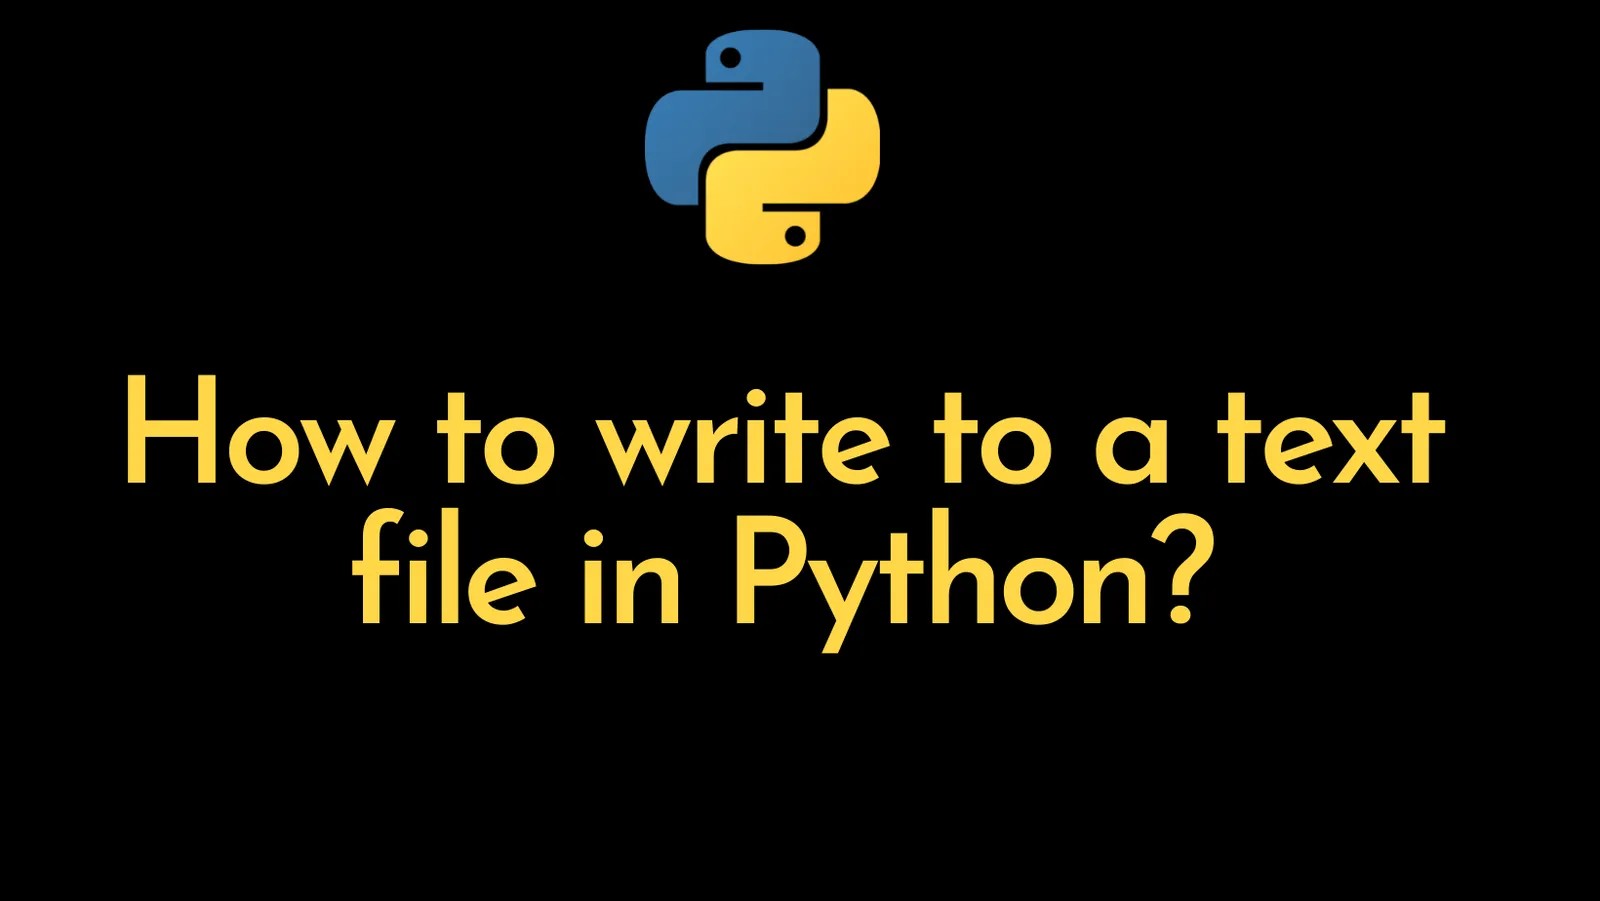 How to write to a text file in Python - ItsMyCode